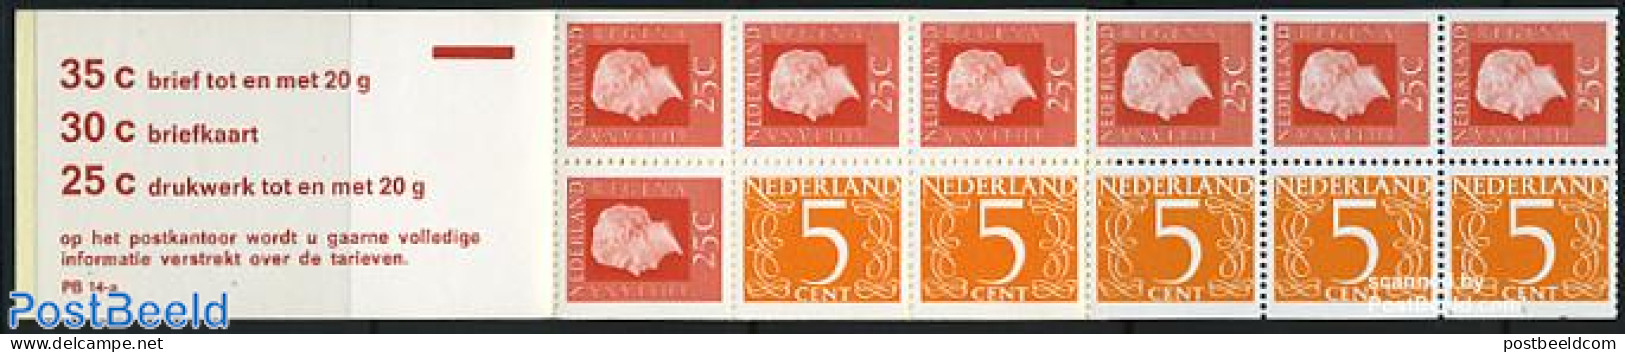 Netherlands 1973 Definitives Booklet With Count Block, Mint NH, Stamp Booklets - Ongebruikt